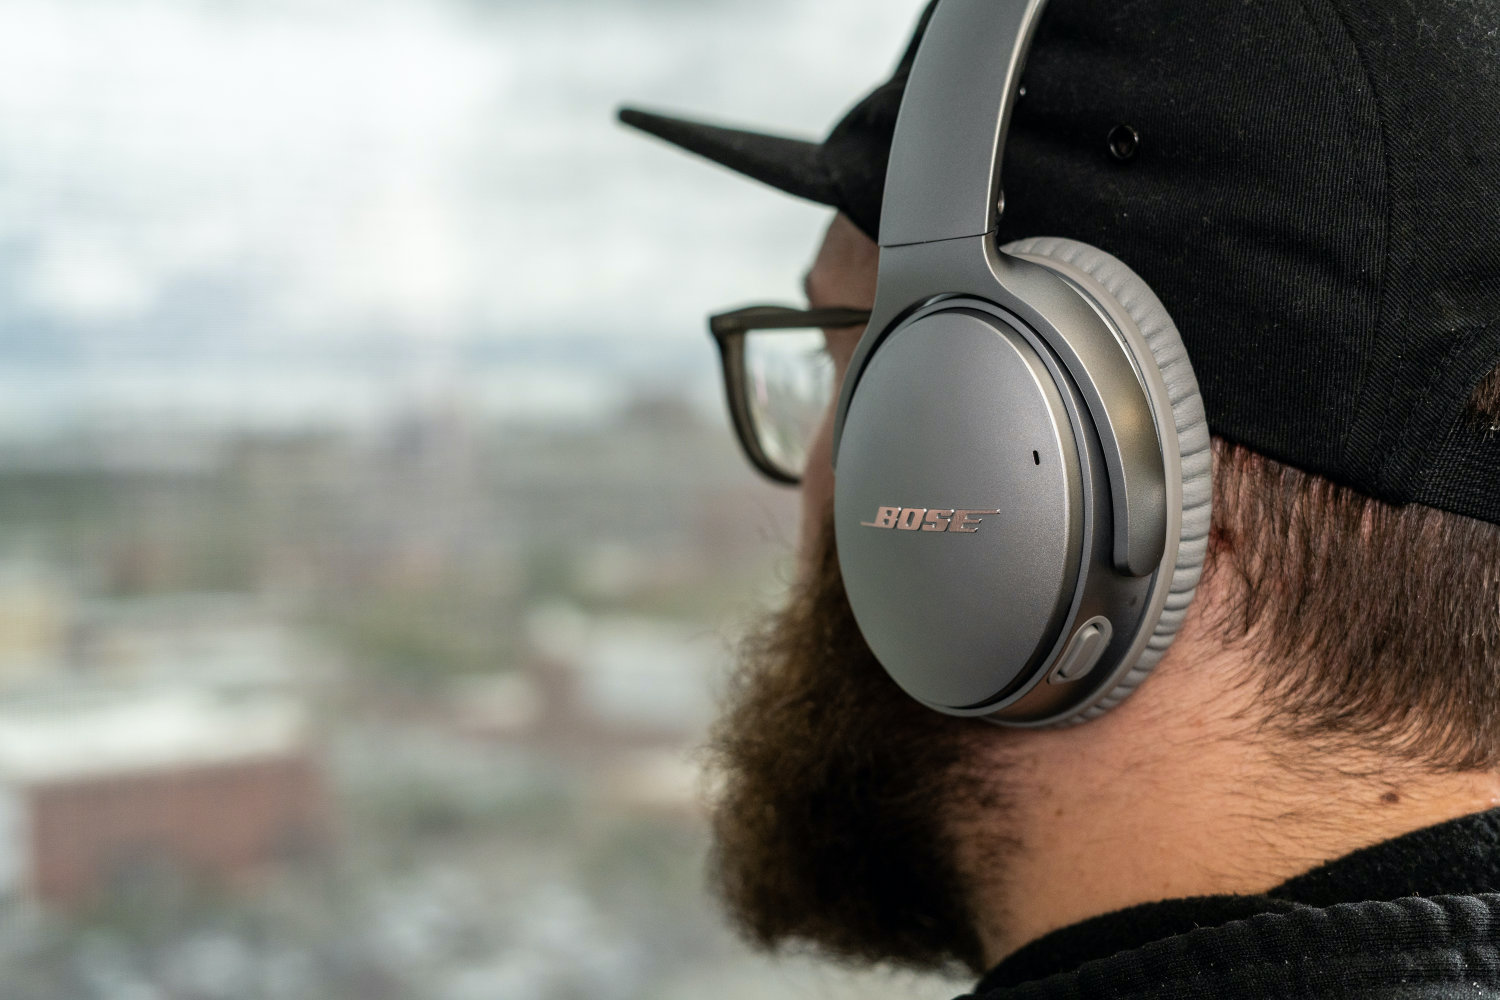 How To Adjust Noise Cancellation On Bose Qc35